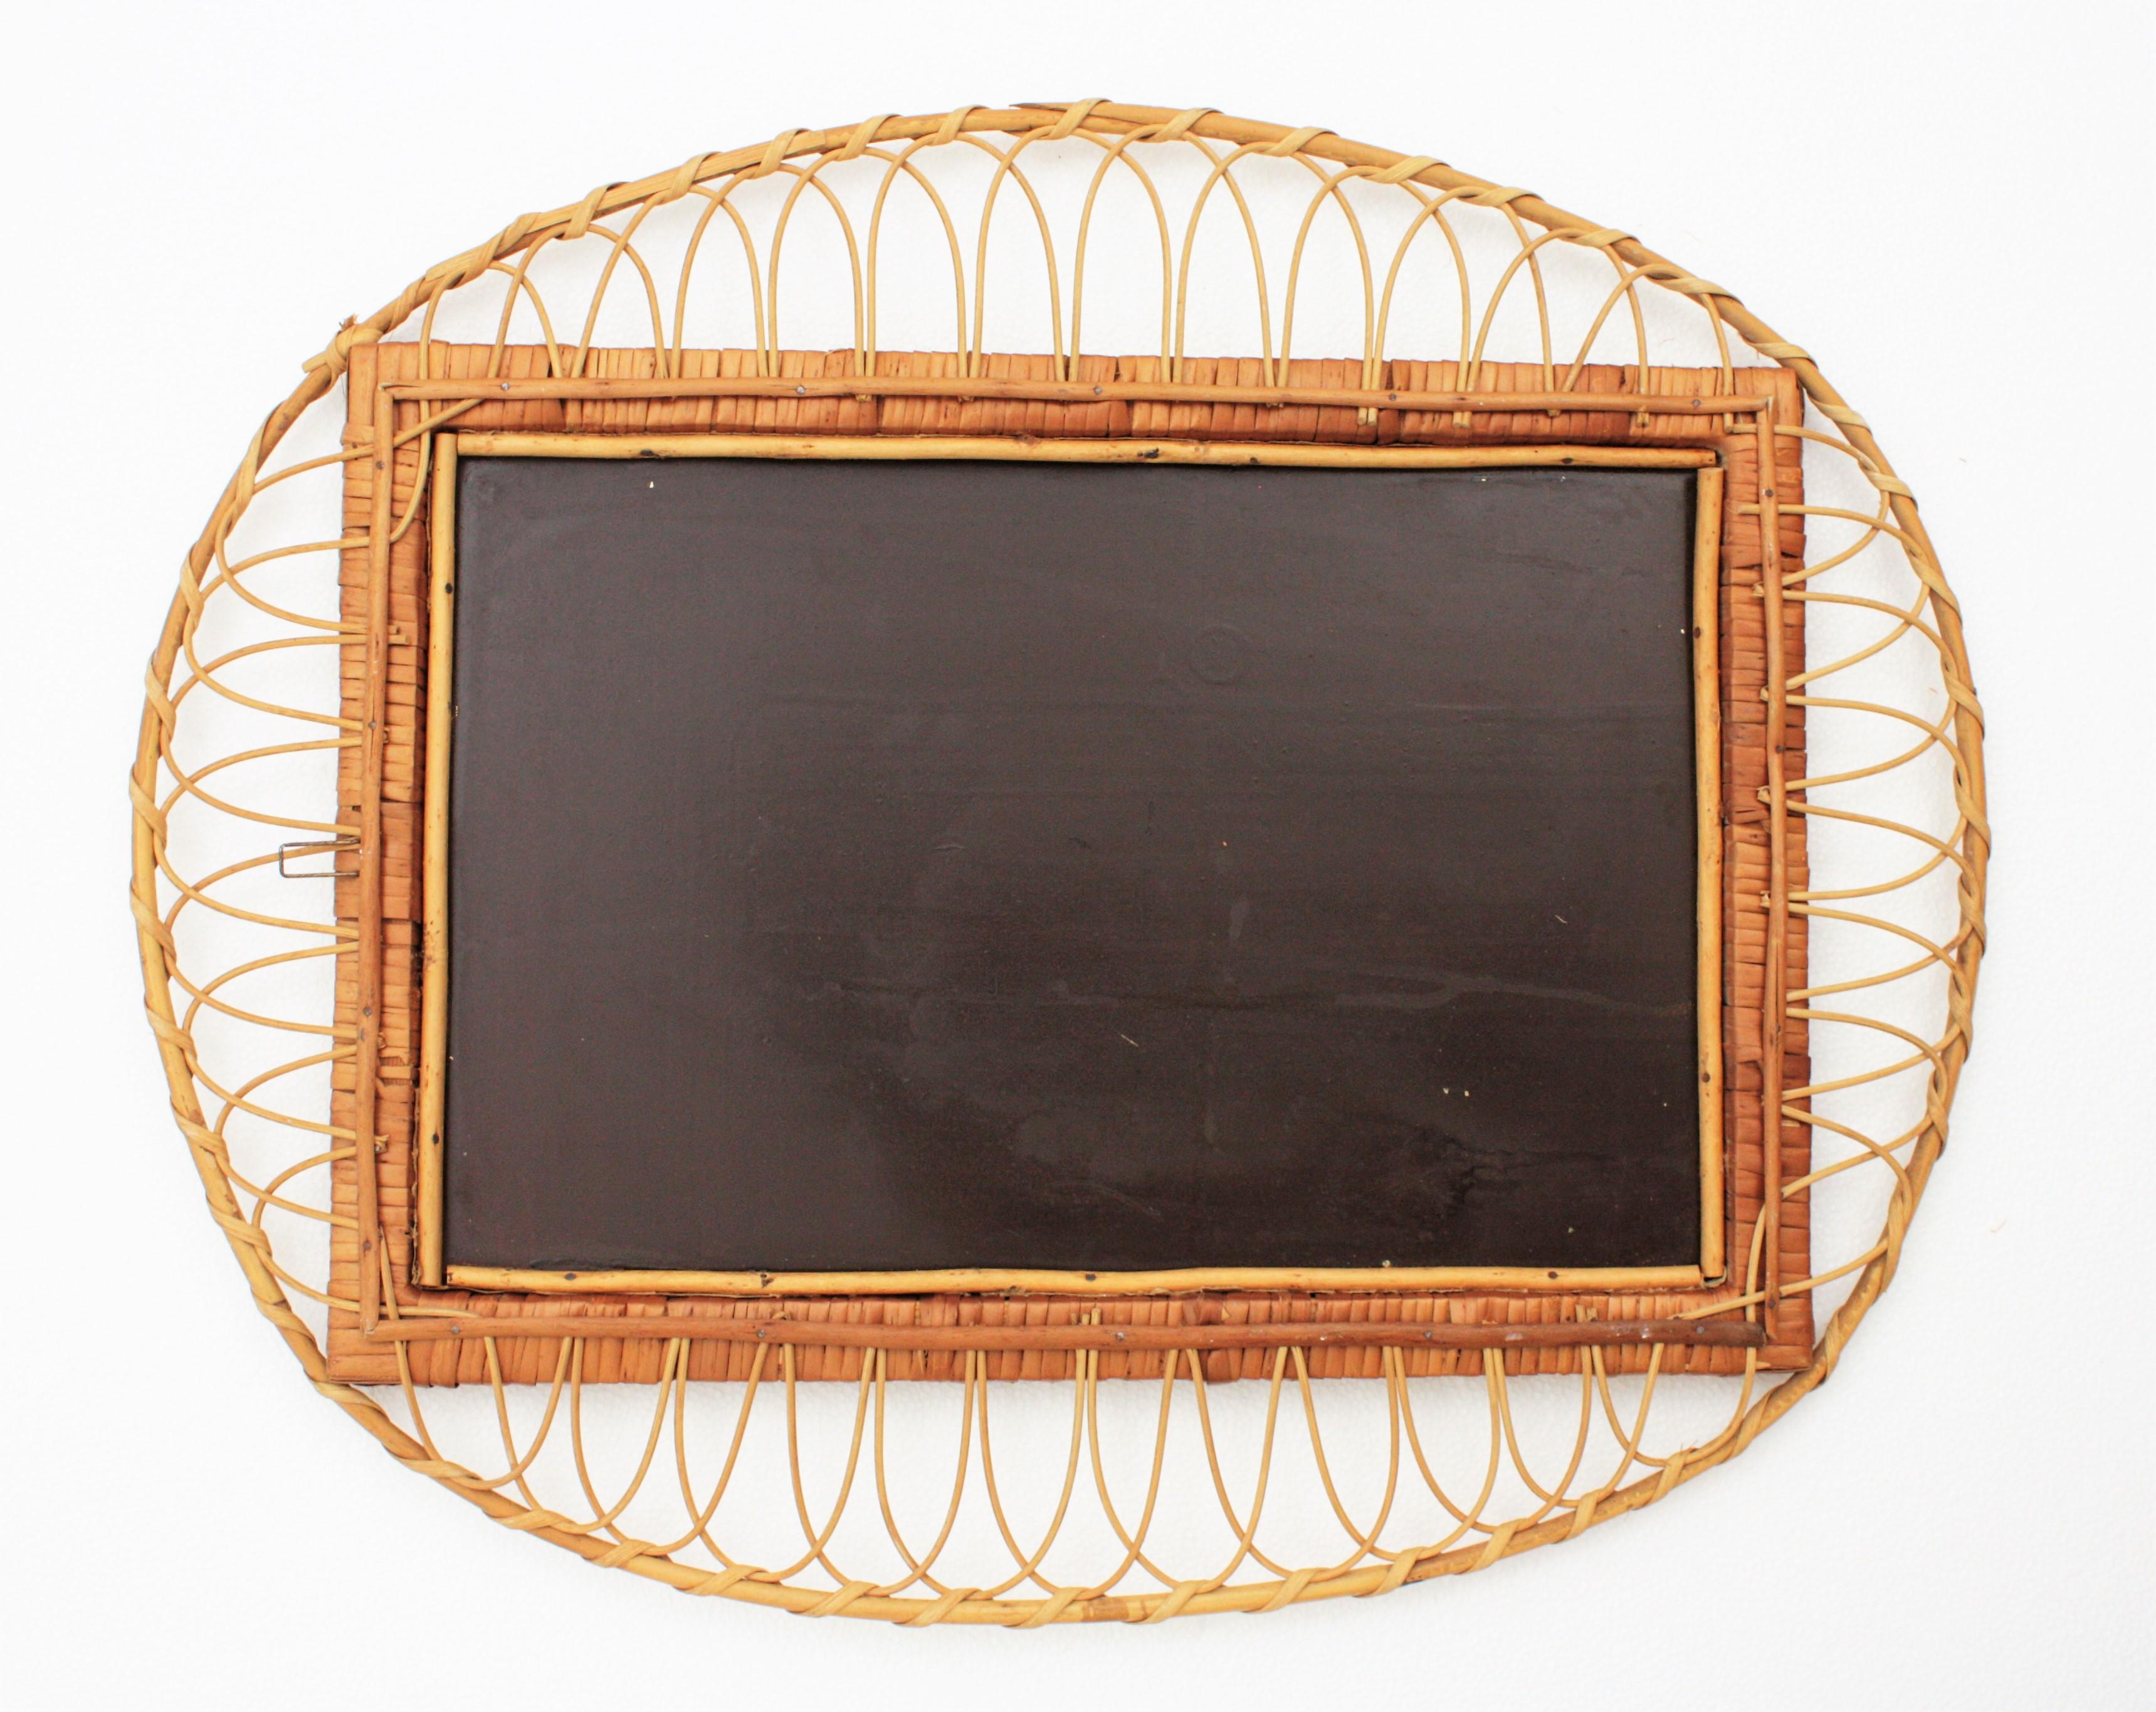 French Rattan Oval Mirror with Woven Rectangular Frame, 1960s For Sale 3